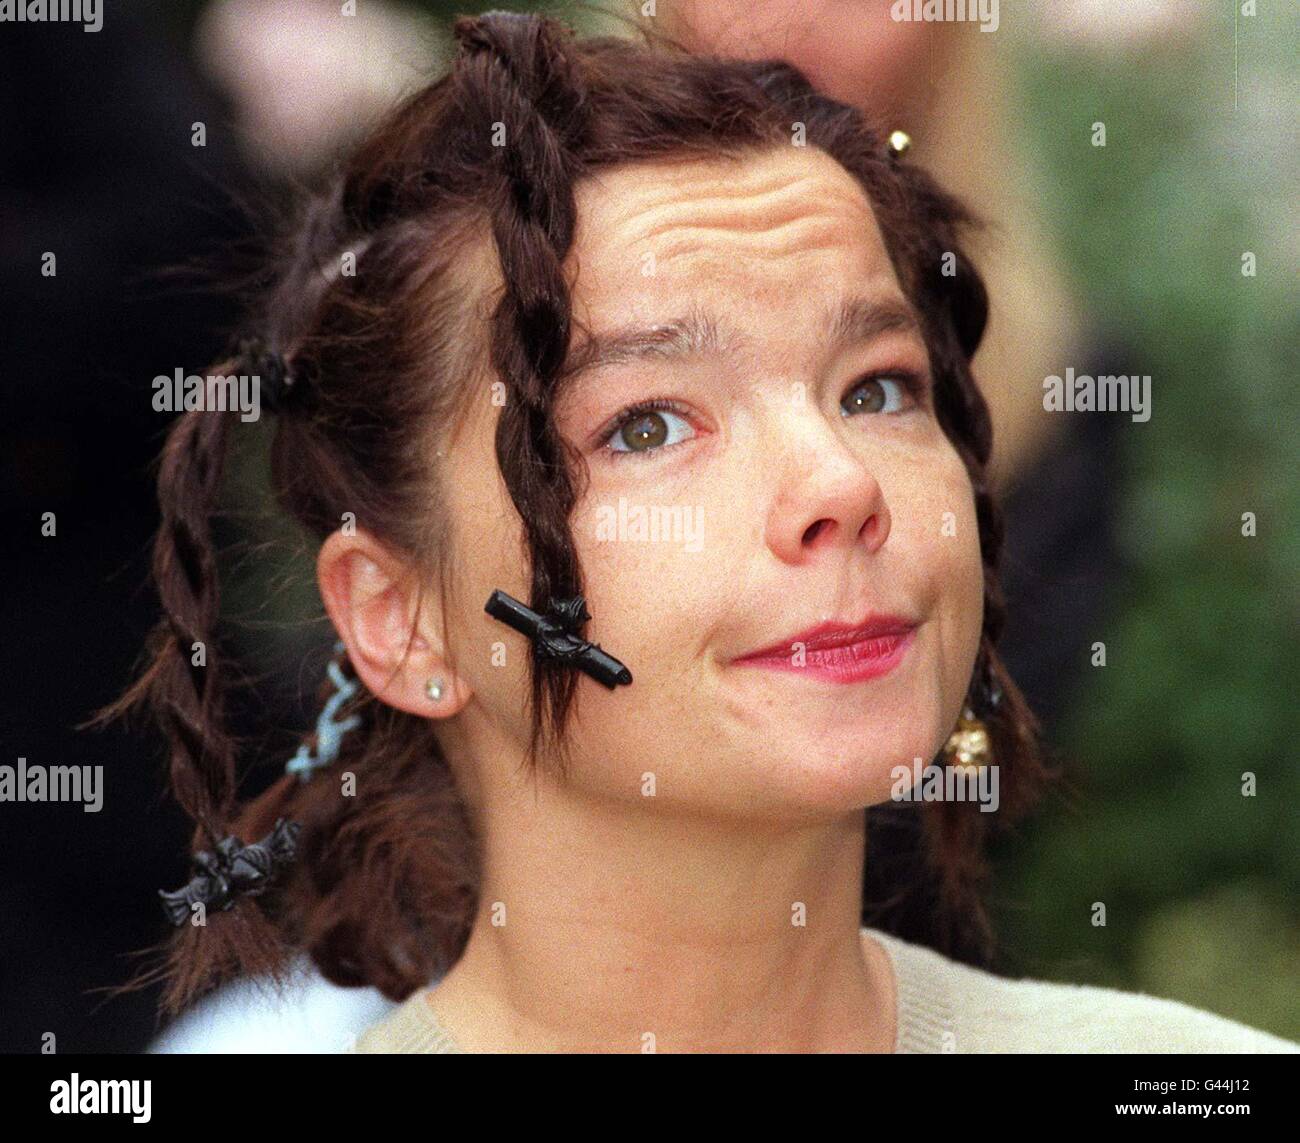 Bjork speaking journalists outside her London home this afternoon (Wednesday) about her sadness over the suicide of a crazed American fan. Ricardo Lopez, 21, sent Icelandic star a booby-trapped